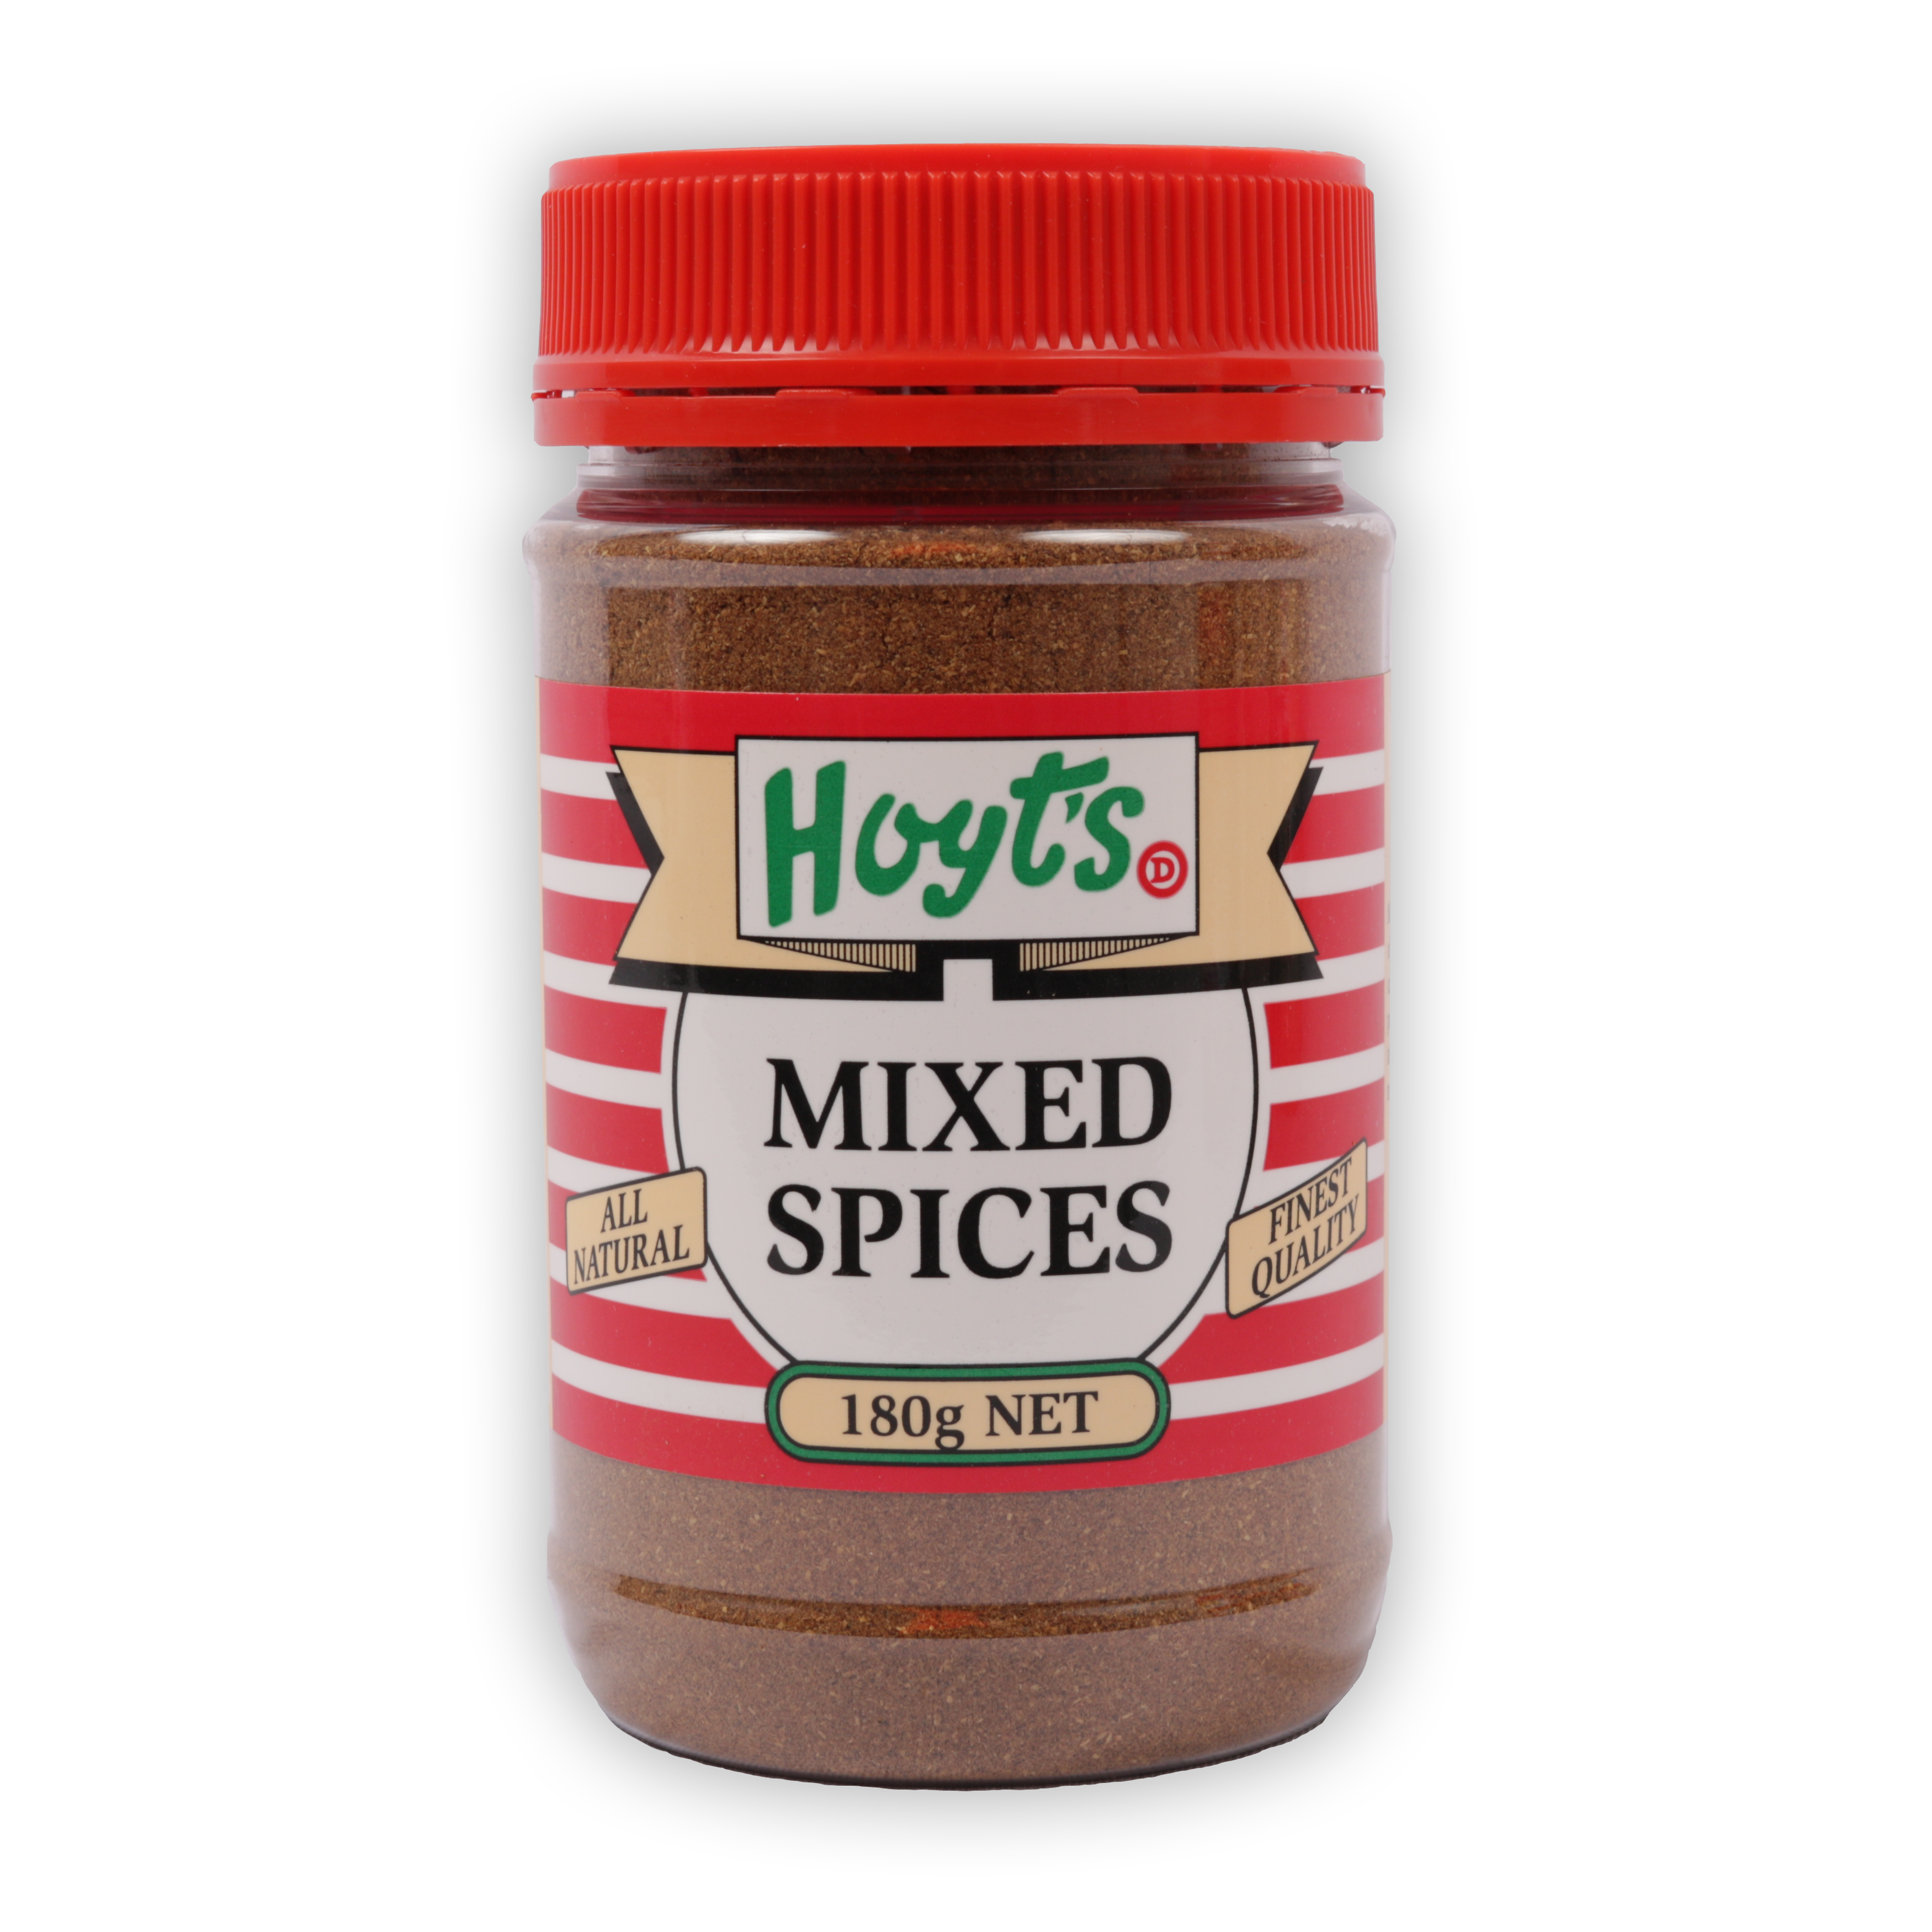 Hoyts Mixed Spices 180g